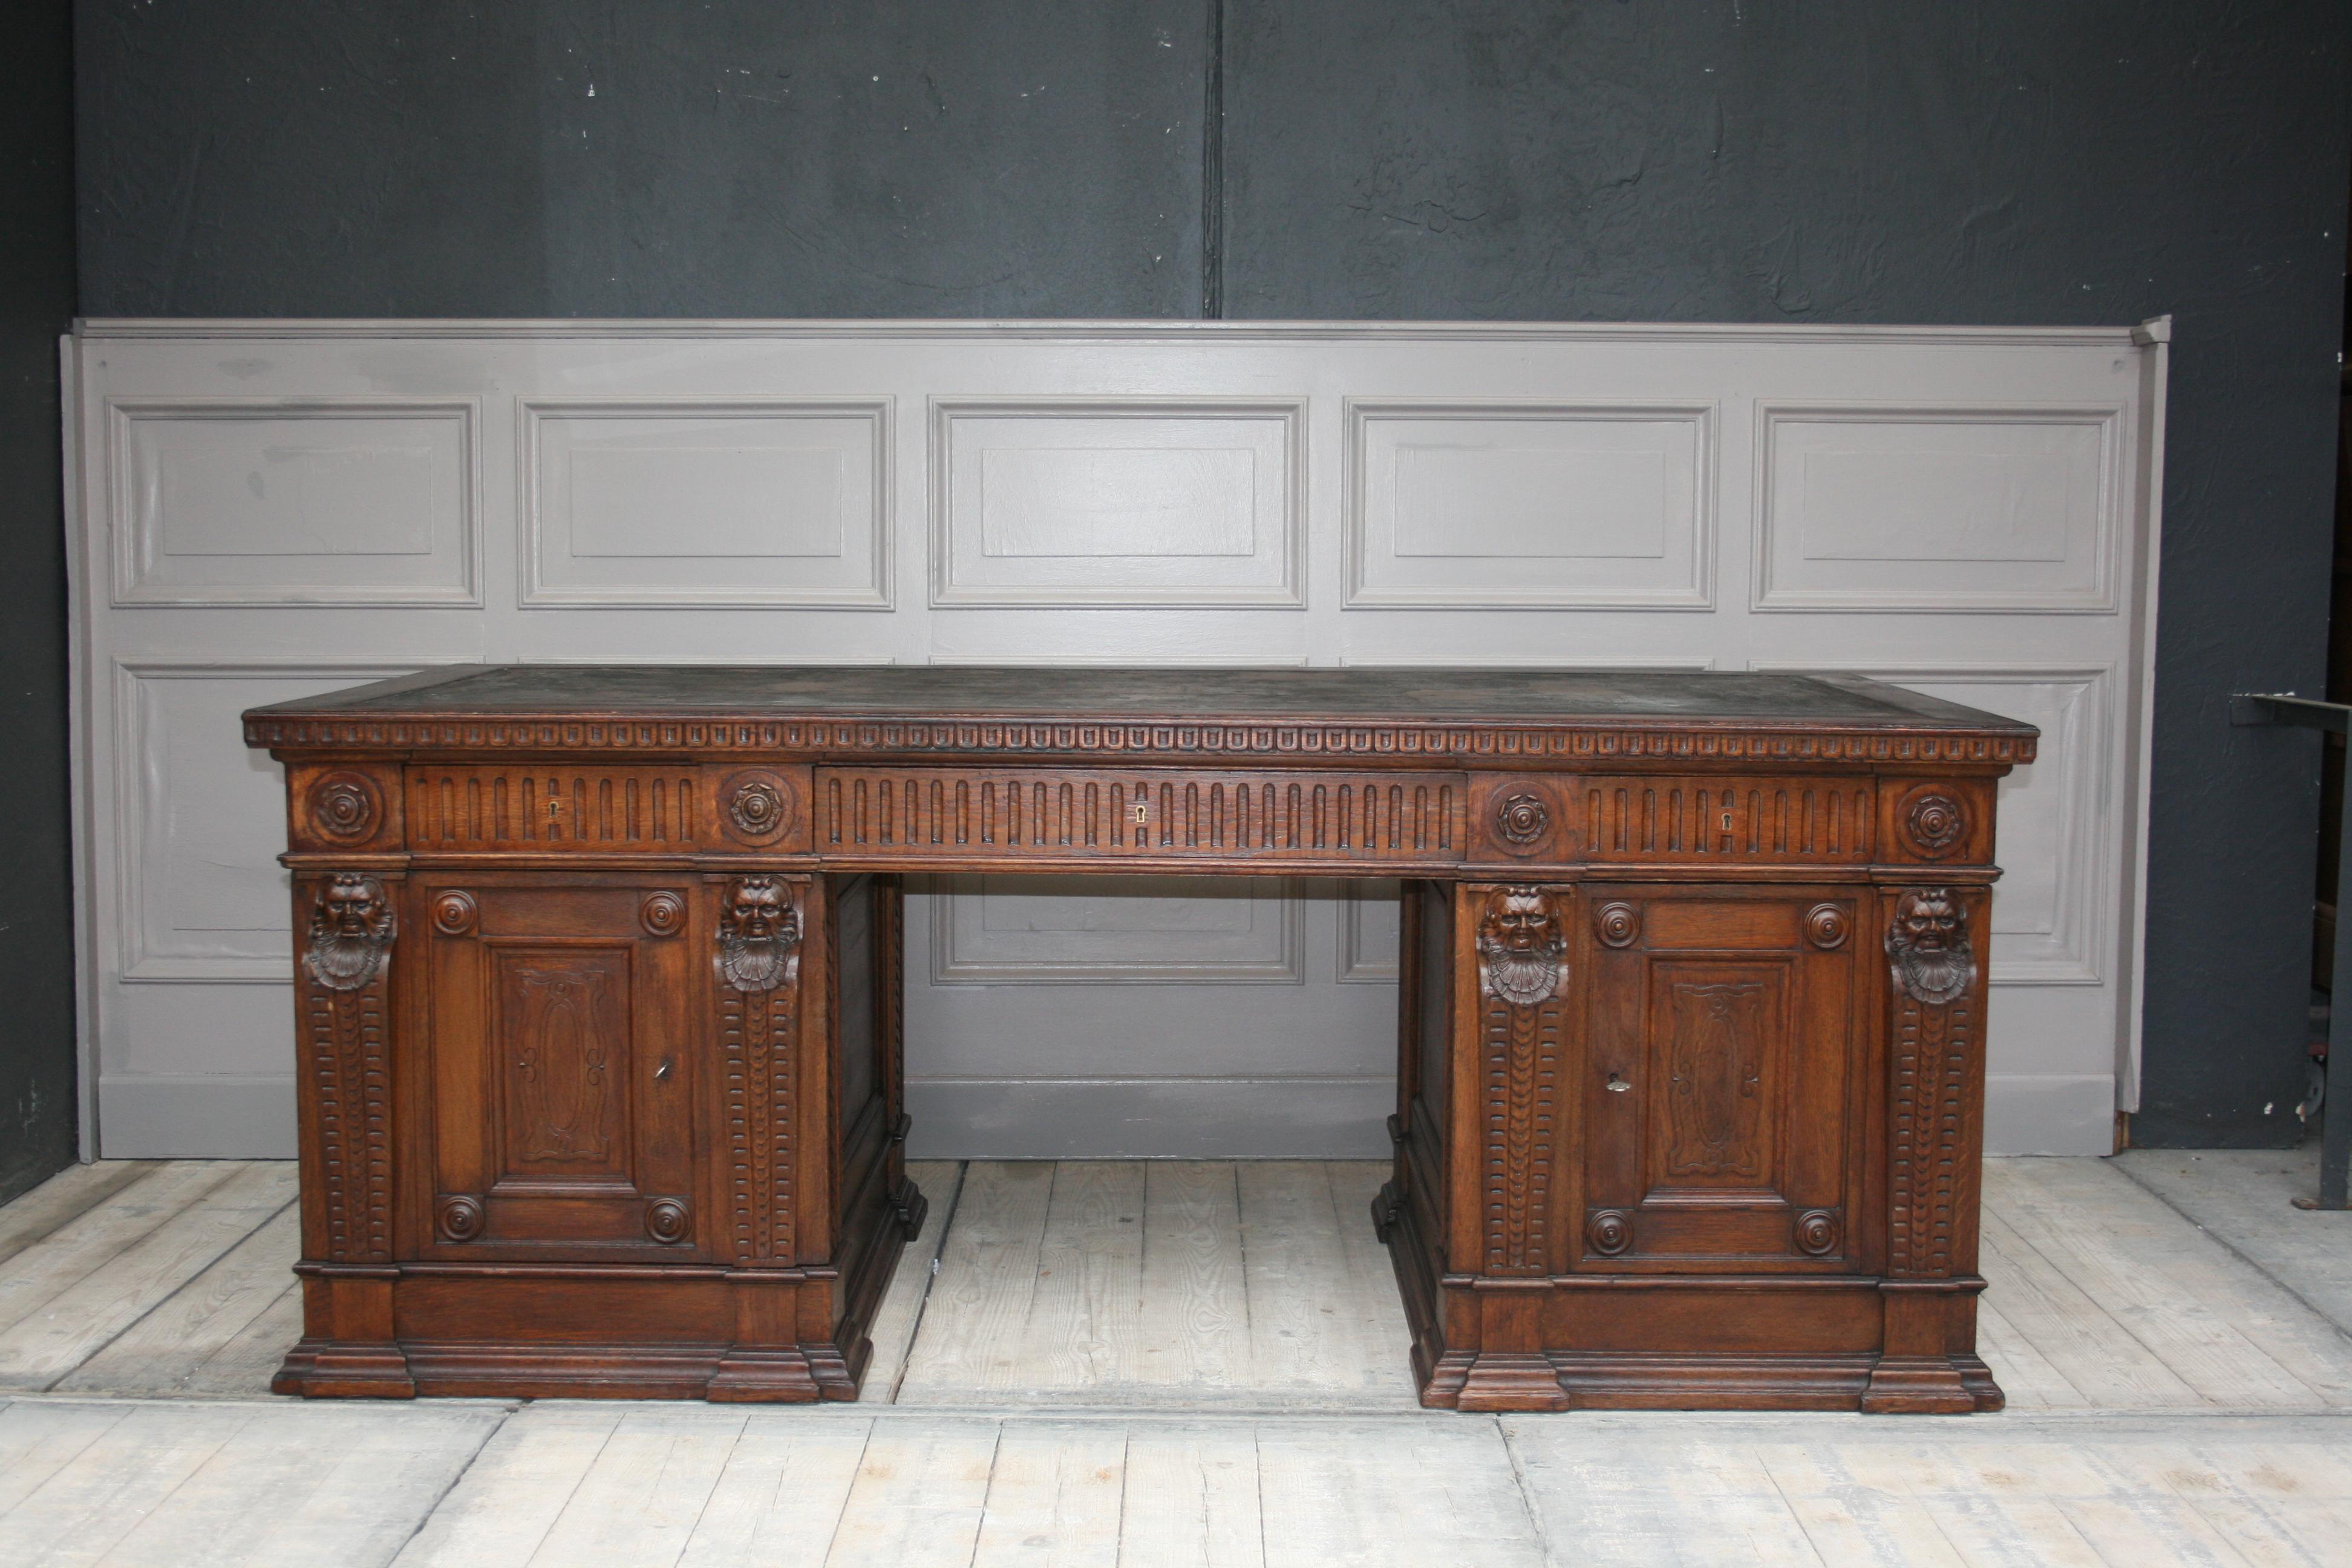 Original German historicism or Renaissance Revival desk from the end of the 19th century.
This stunning desk is usable on both sides and can stand free standing in the room. The entire desk has carvings all around, including 4 grotesque heads on